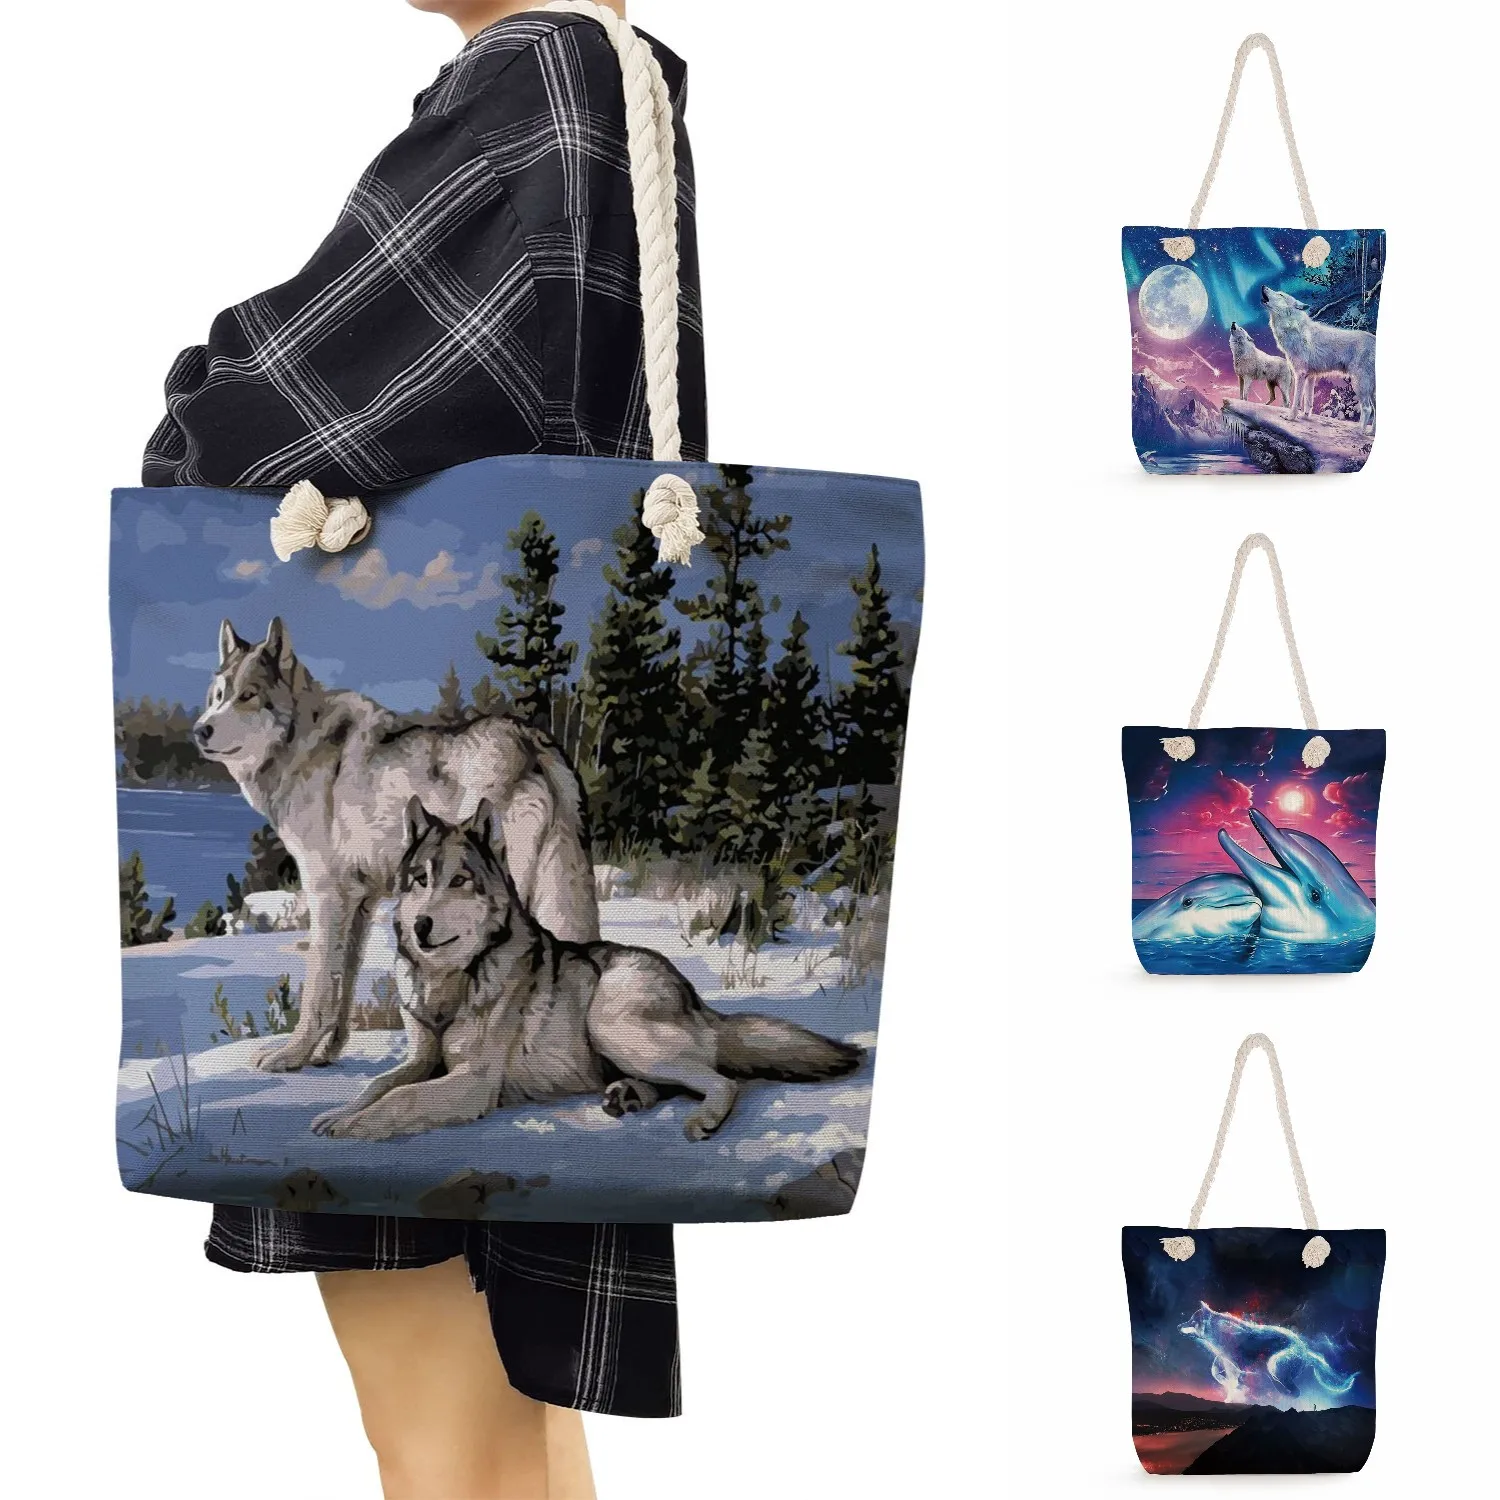 

Animal Design Thick Rope Shoulder Bags For Women Portable Wild Wolf Whale Print Handbags Cool Style The Tote Travel Shopping Bag